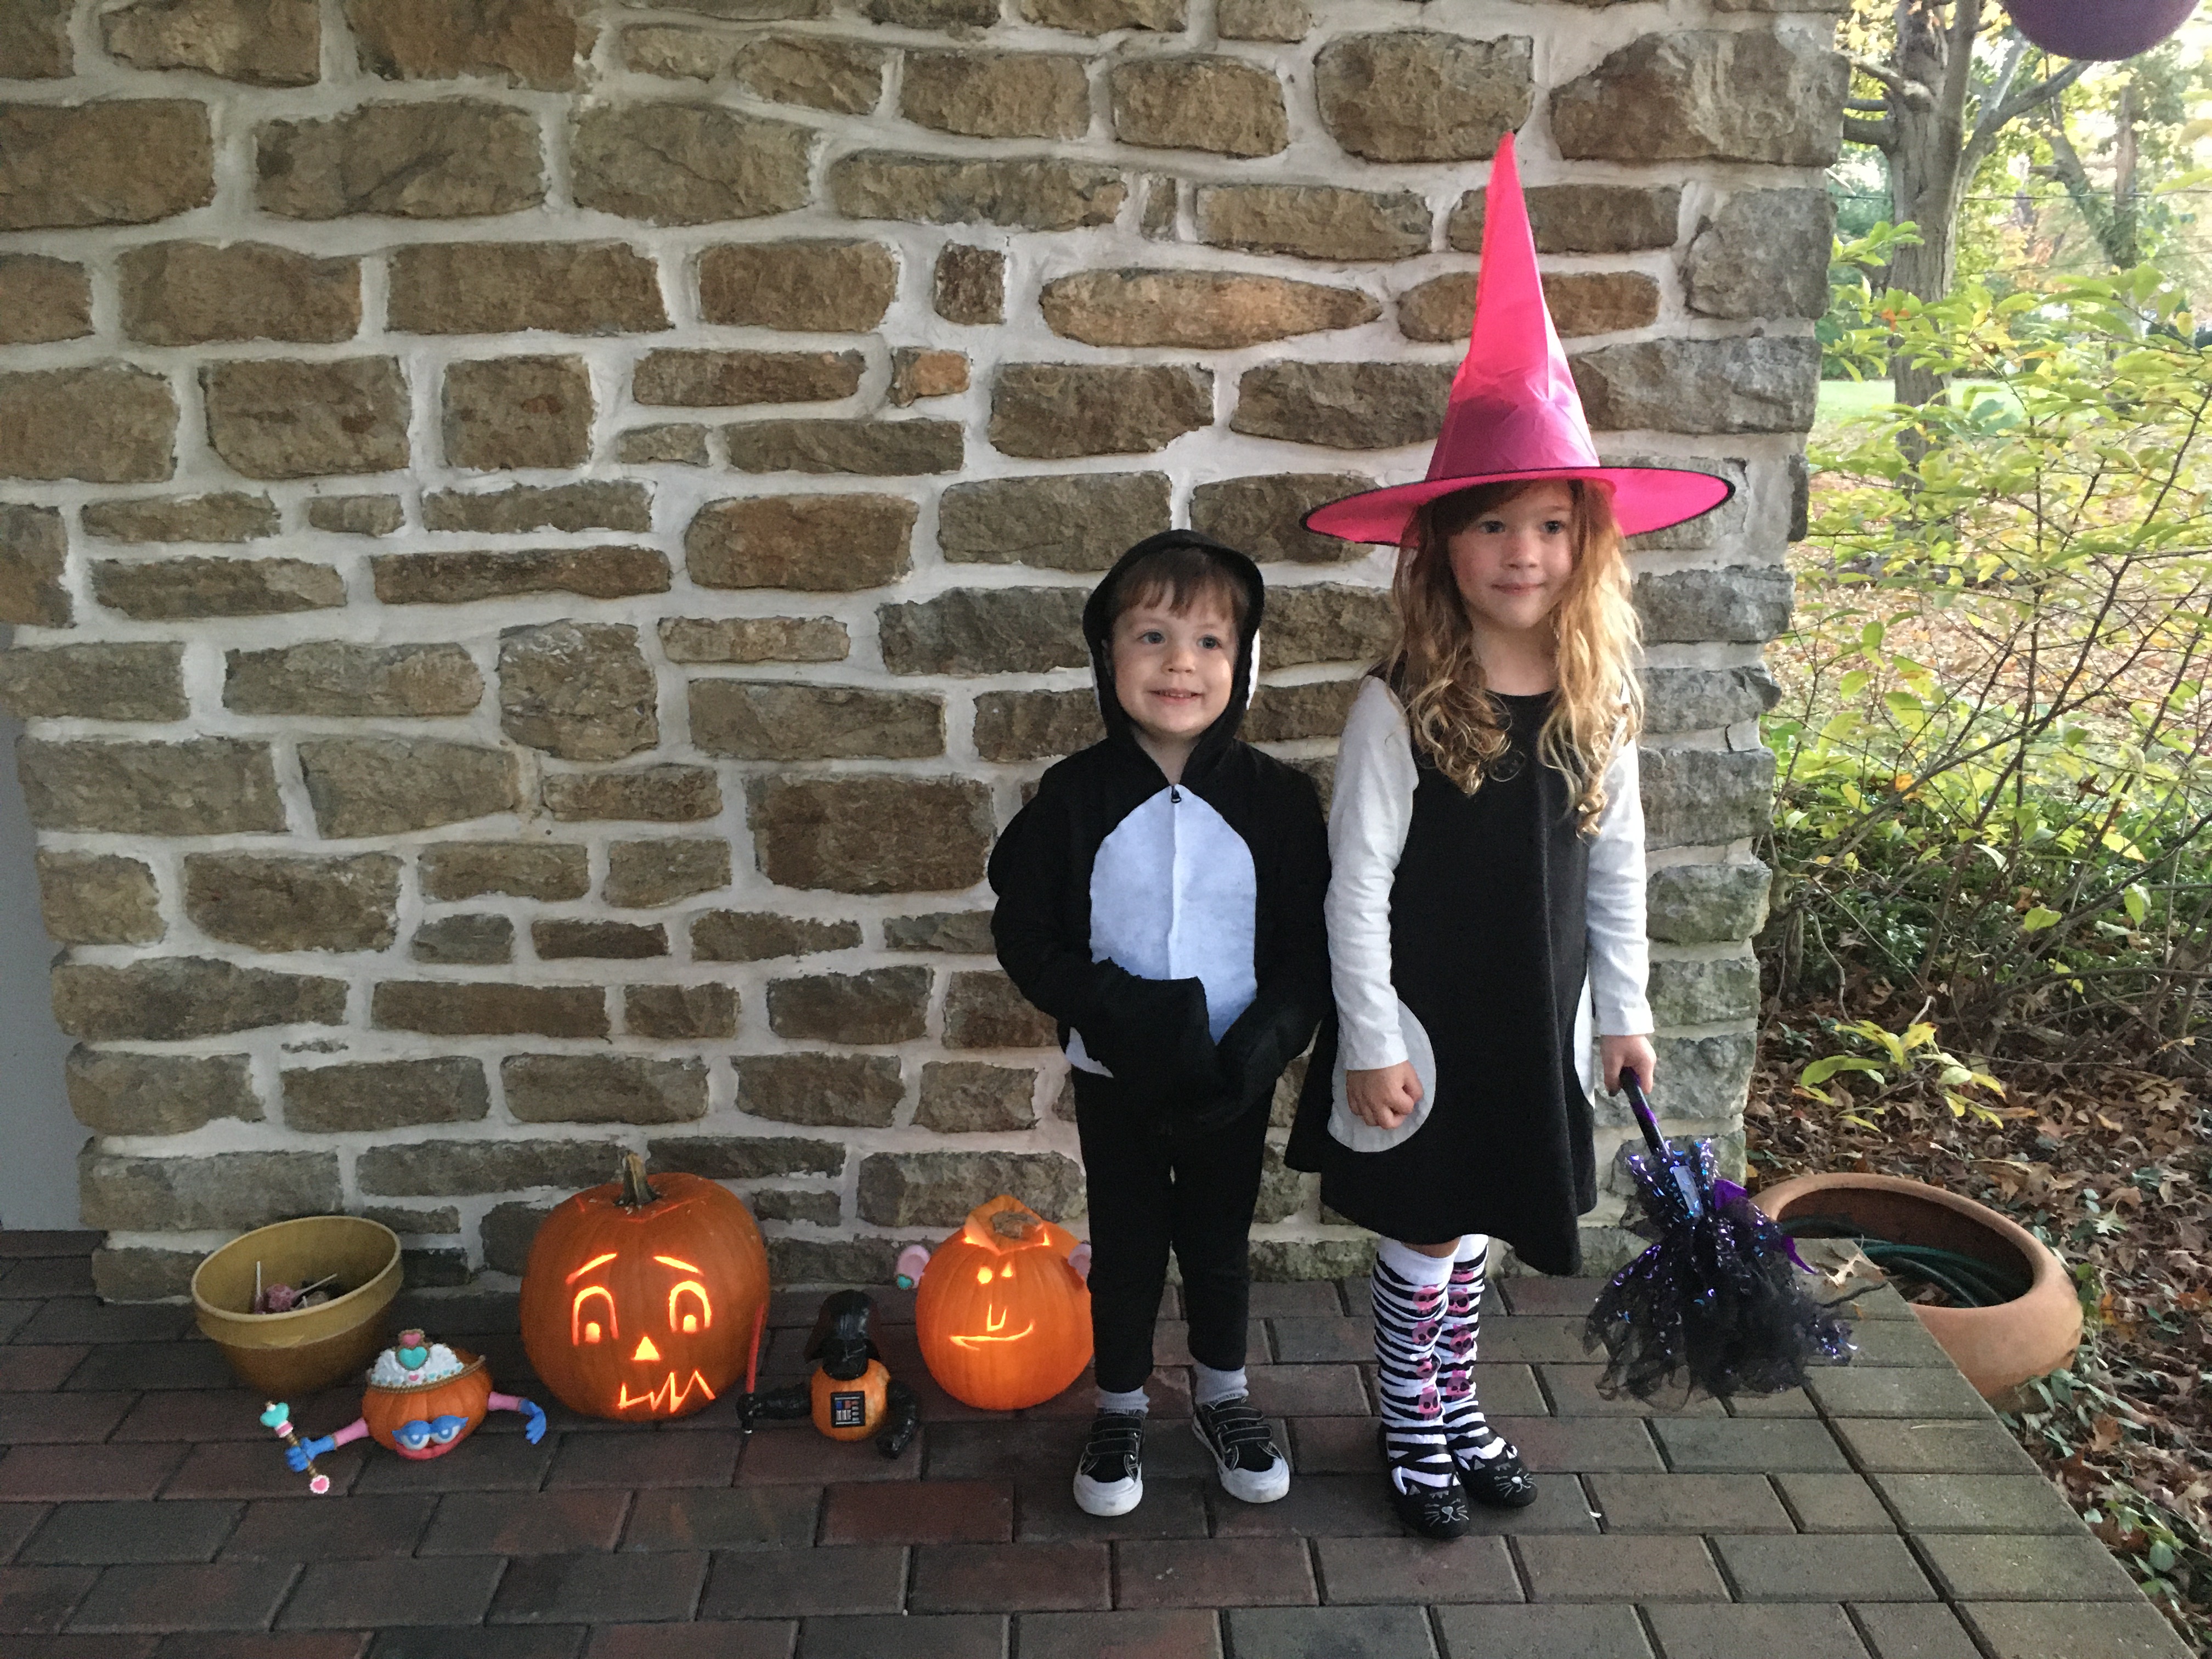 Two children dressed up for Halloween, one dressed as an orca, another dressed as a witch